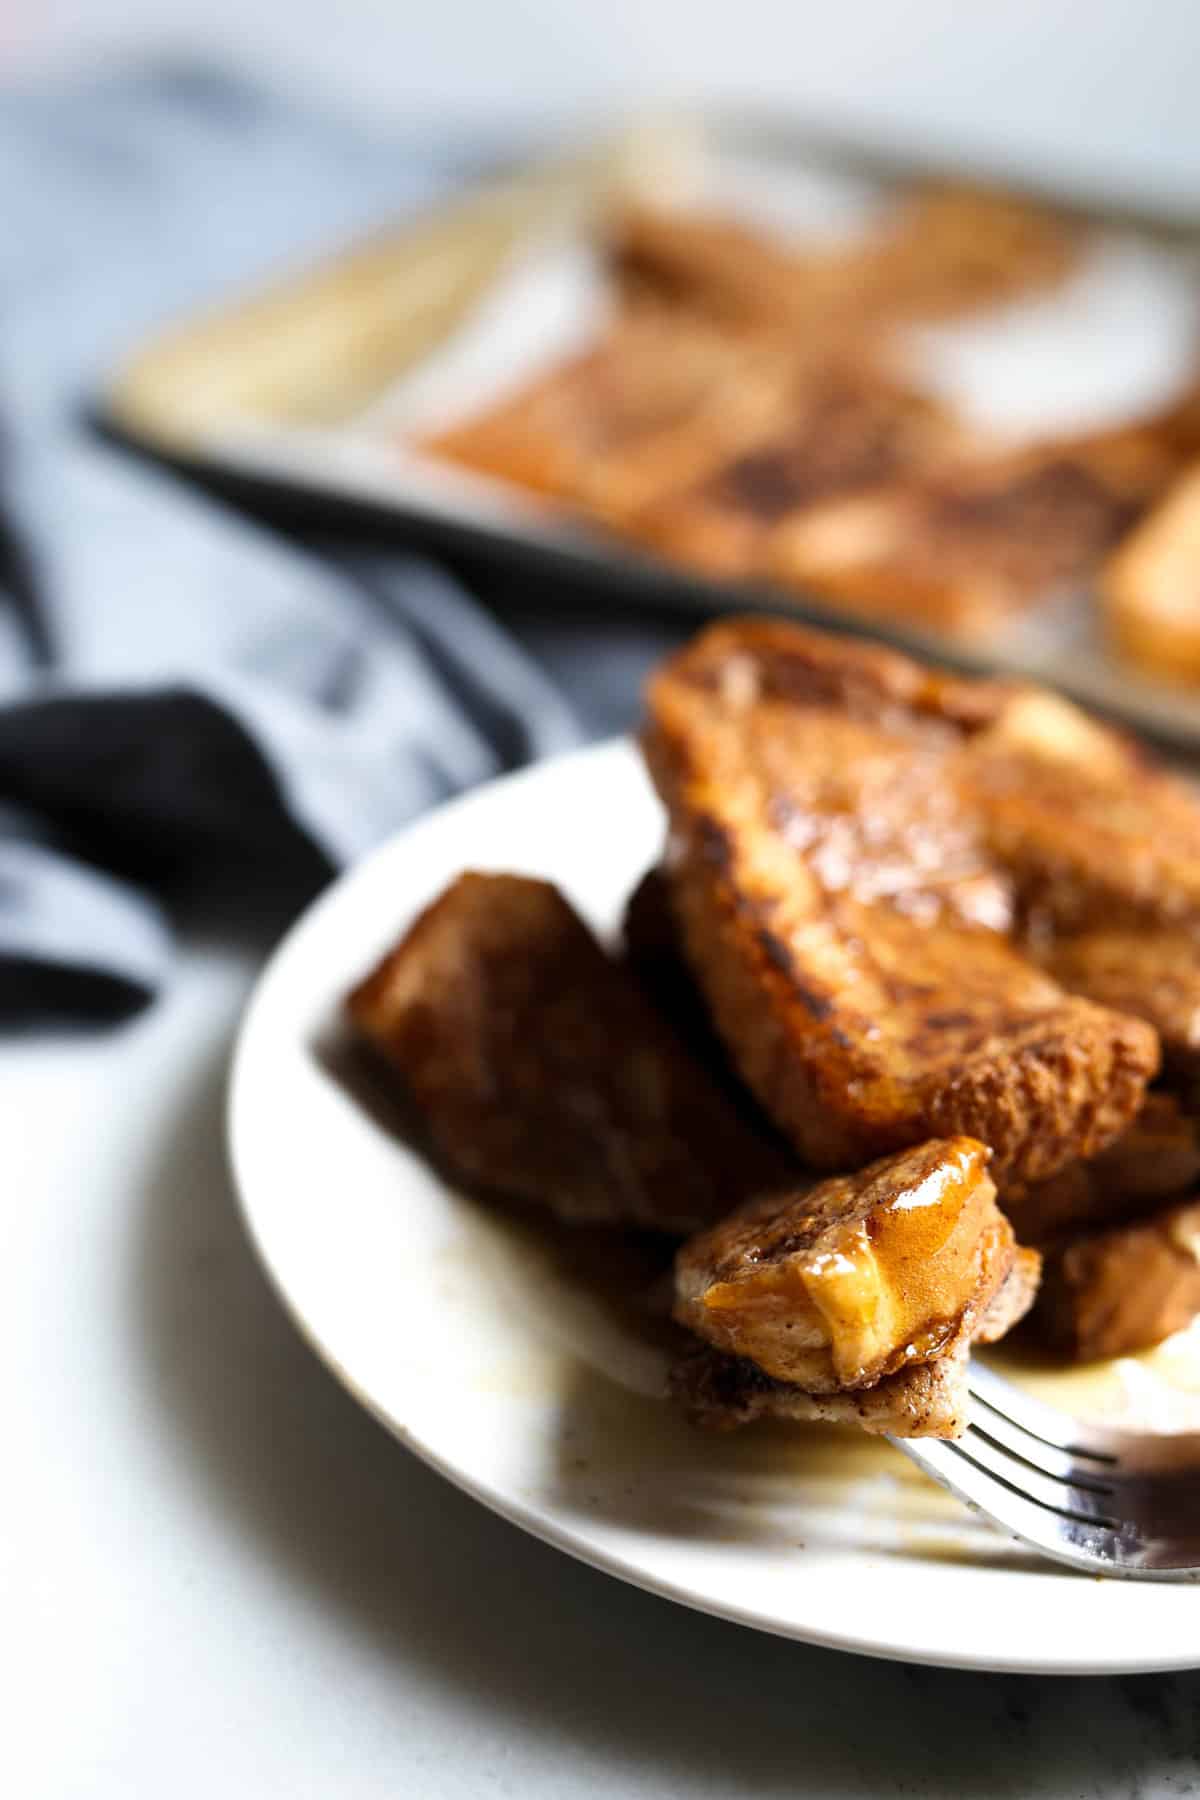 These homemade VEGAN French Toast Sticks are super quick, easy and healthy to make! Cinnamon flavored and totally yummy! no bananas or weird ingredients!